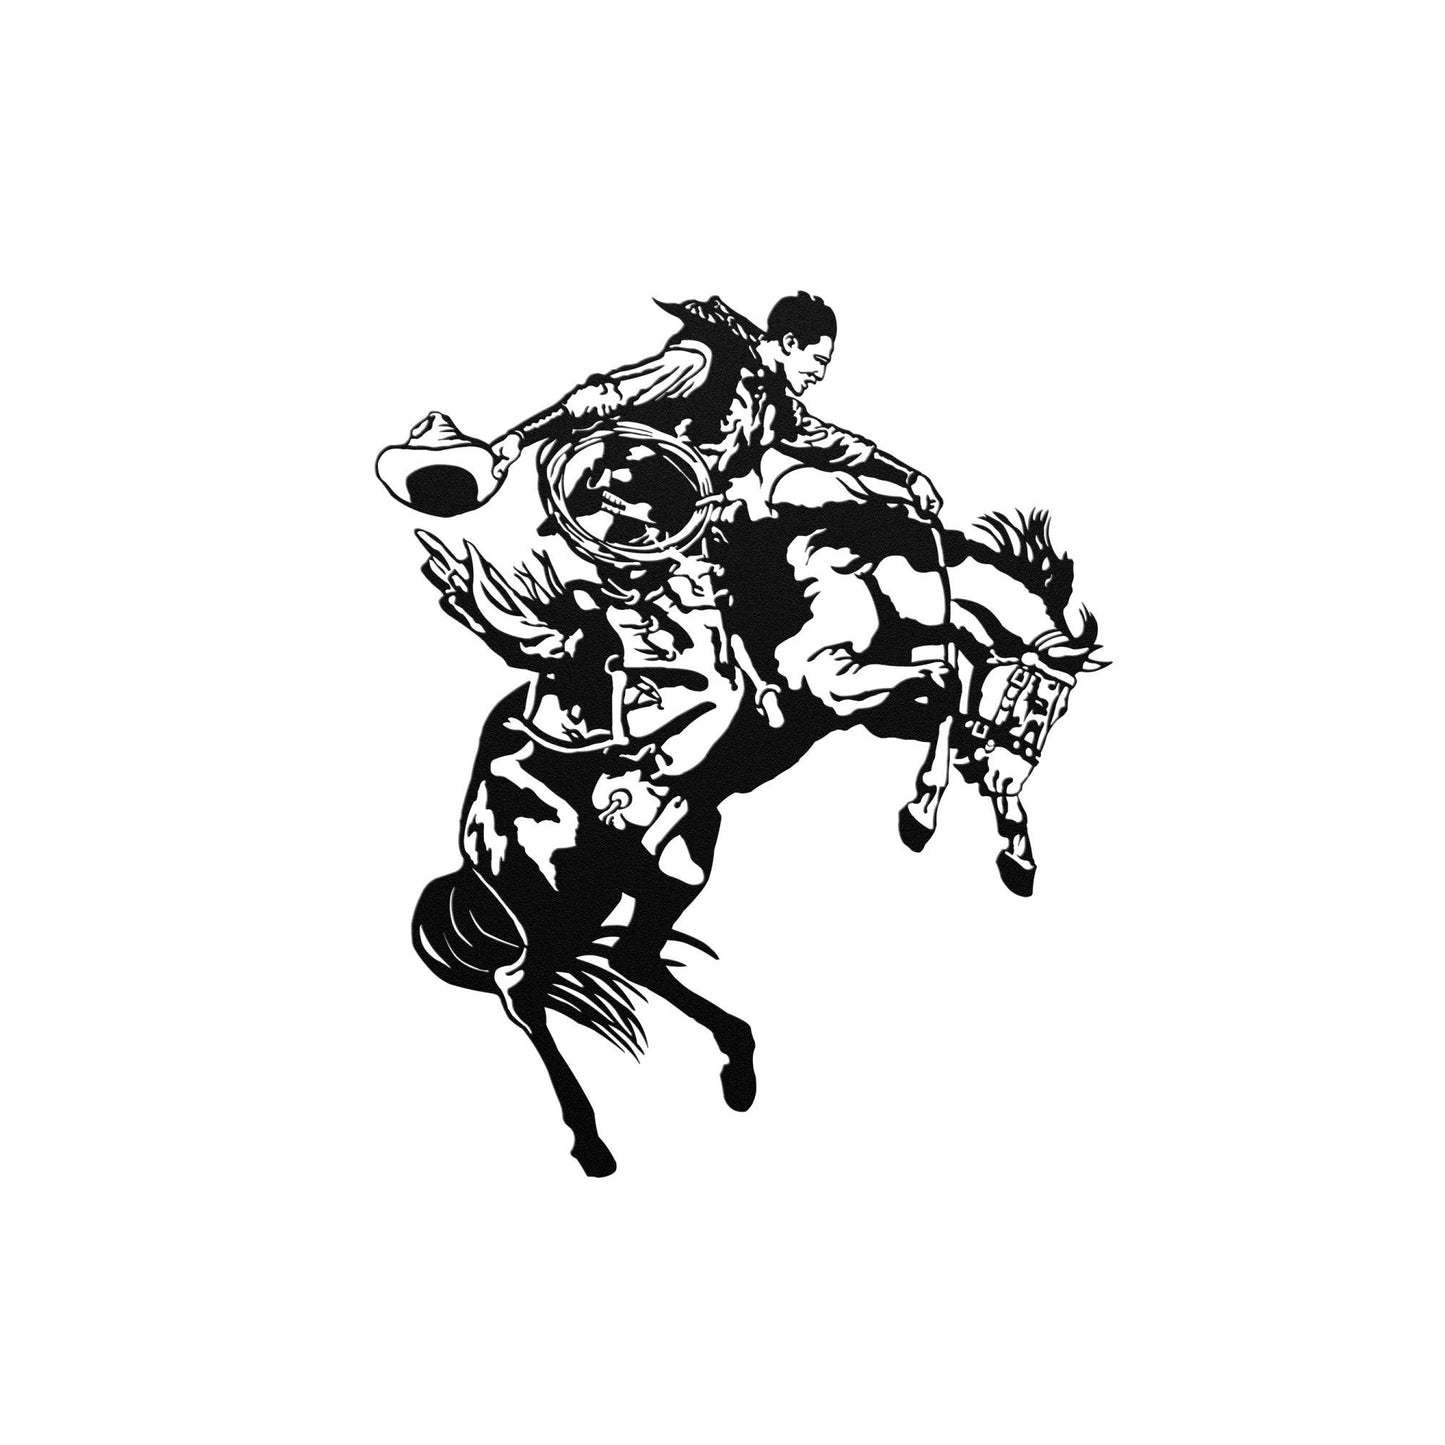 Bronc Riding Cowboy Vintage Old Western Cowboy Metal Wall Decor Ranch Artwork for Cattle or Horse Ranch and Farm, Rustic Wall Art